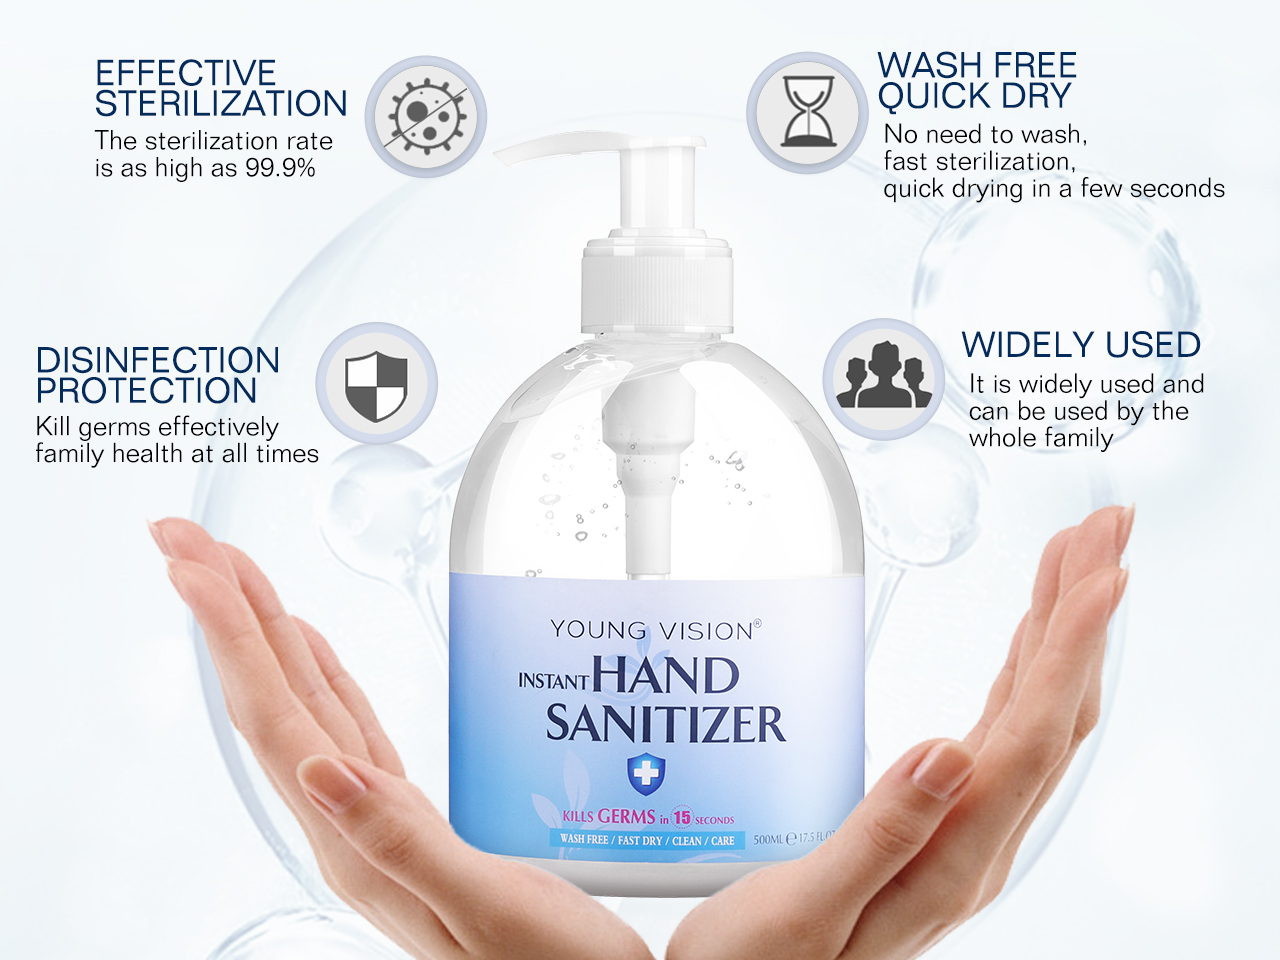 YOUNG VISION 70% Alcohol Quick-Drying Hand Sanitizer